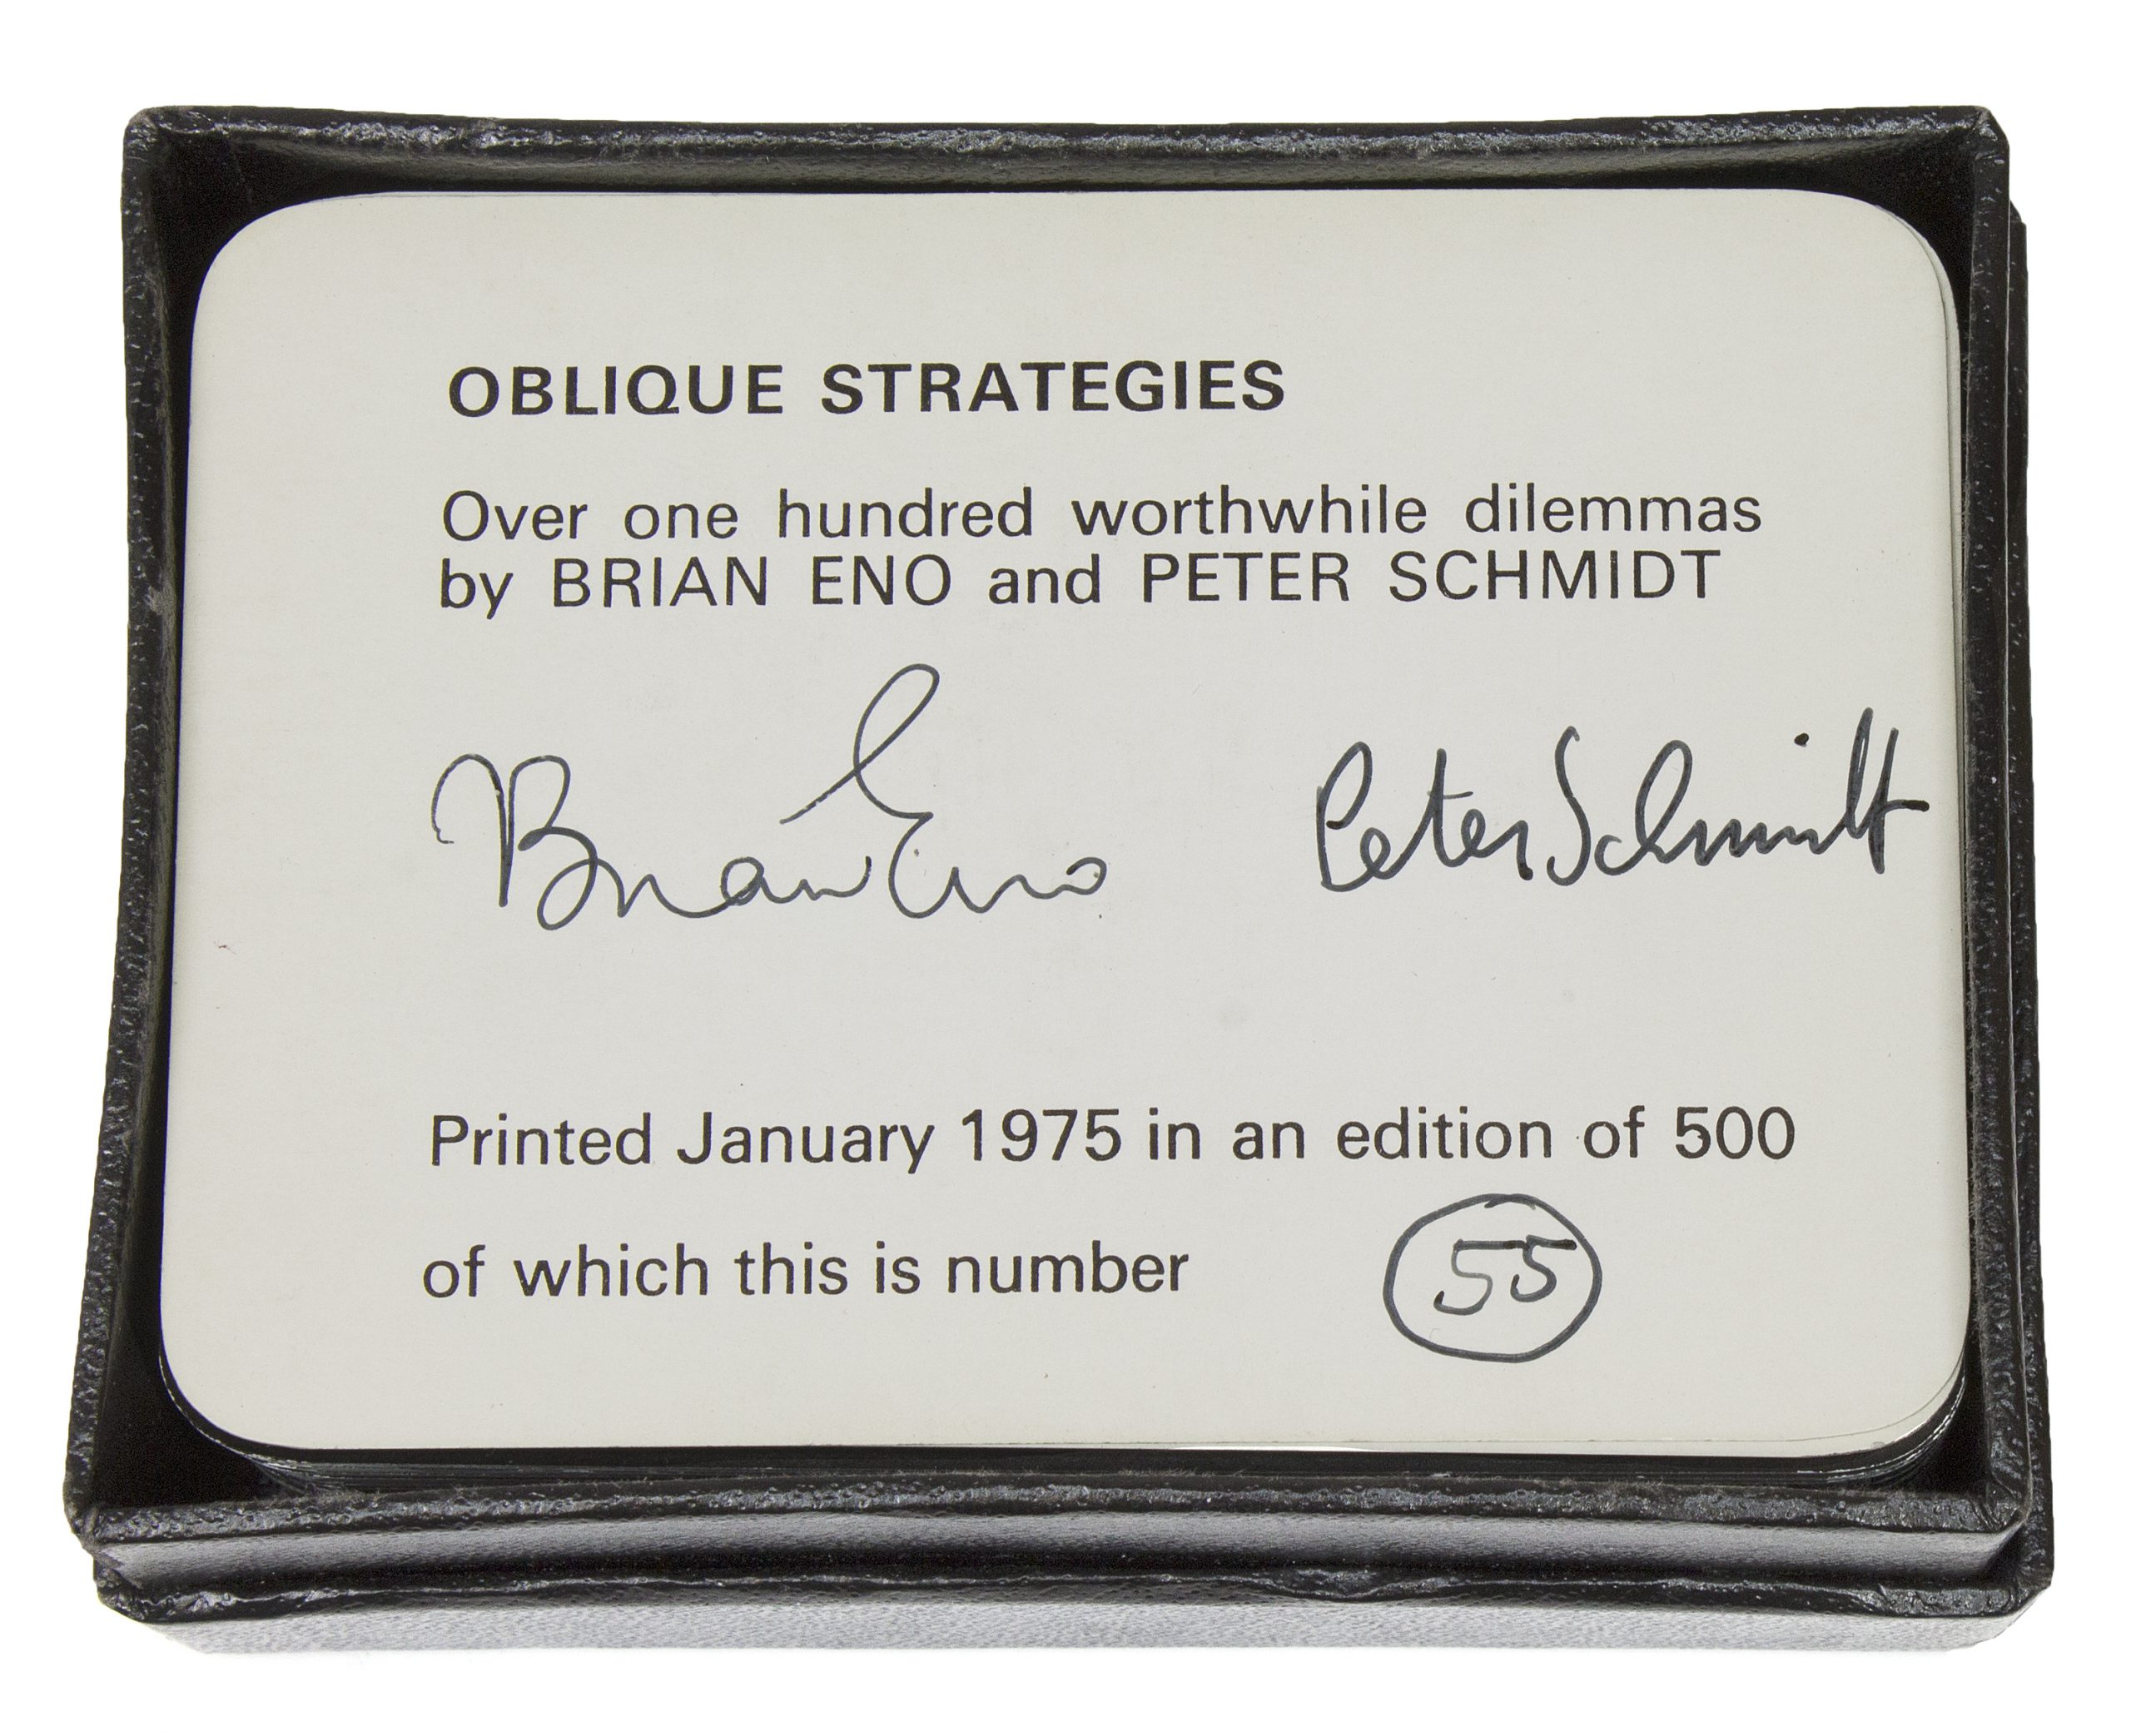 Brian Eno and Peter Schmidt. Oblique Strategies. 1975. – TEMPORARY 